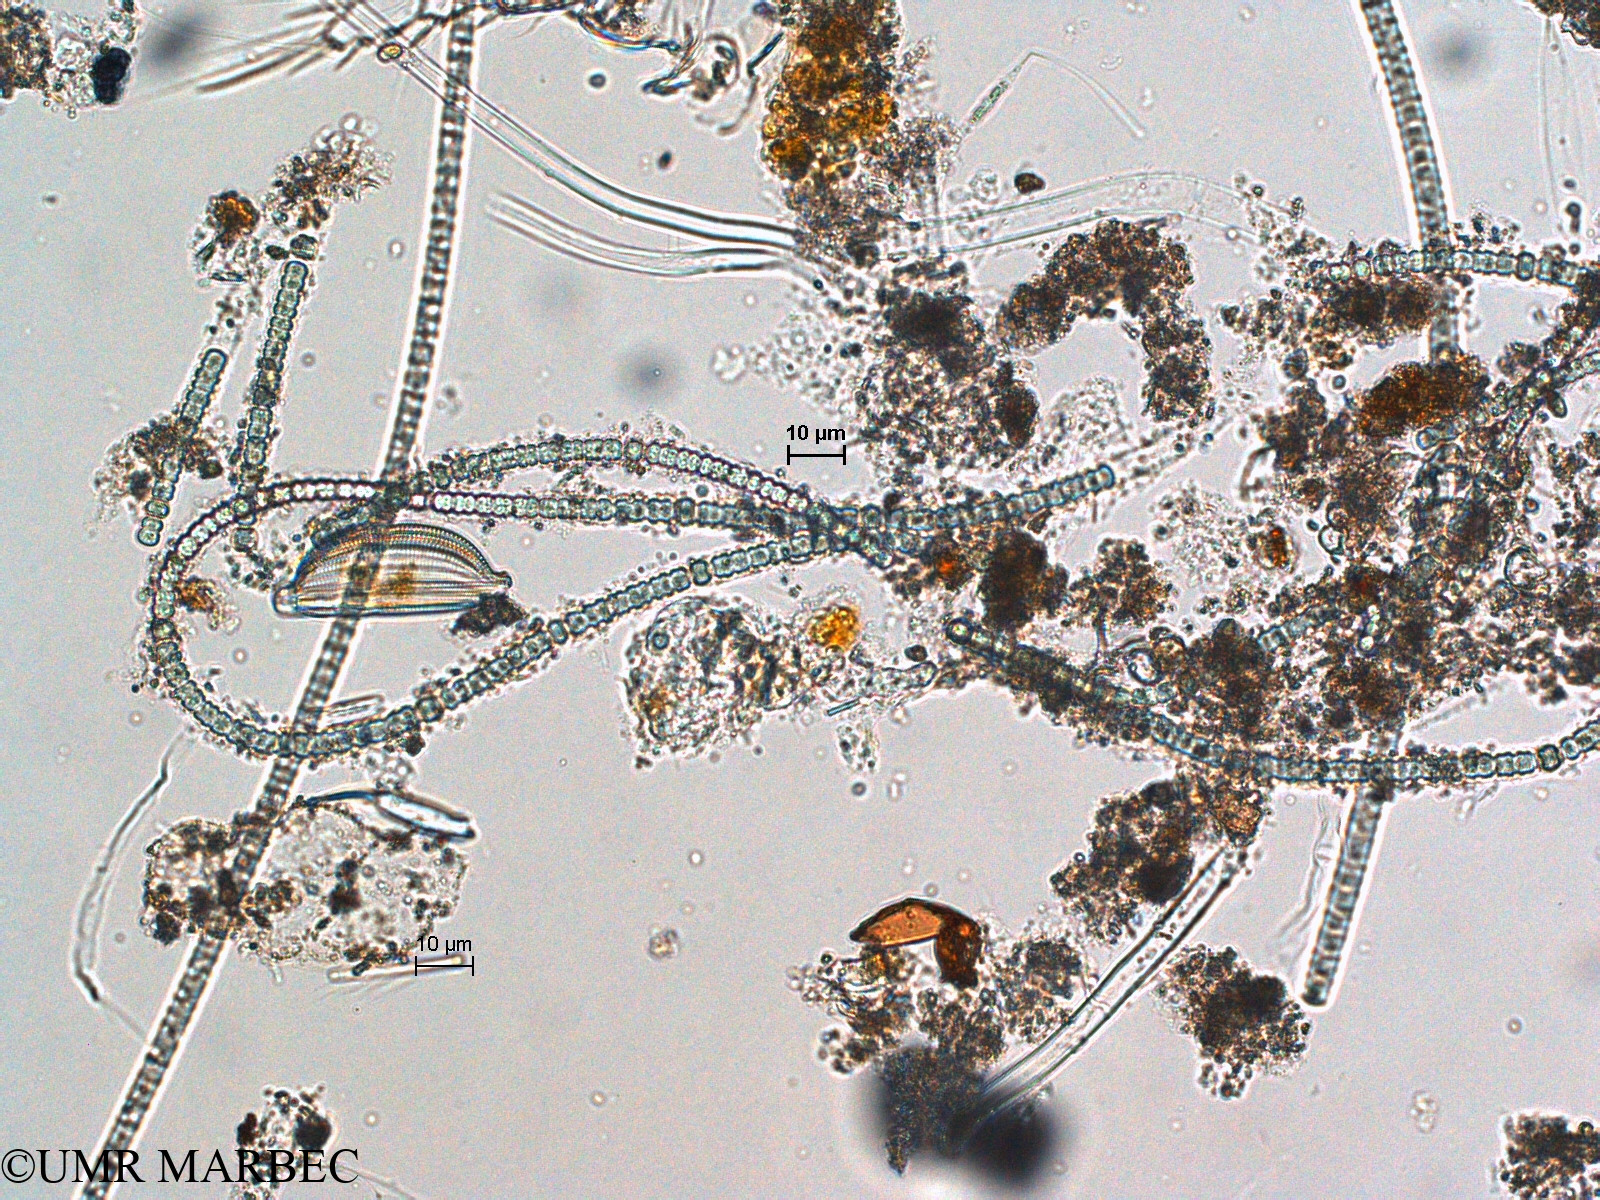 phyto/Scattered_Islands/europa/COMMA April 2011/Anabaena sp1 (1)(copy).jpg